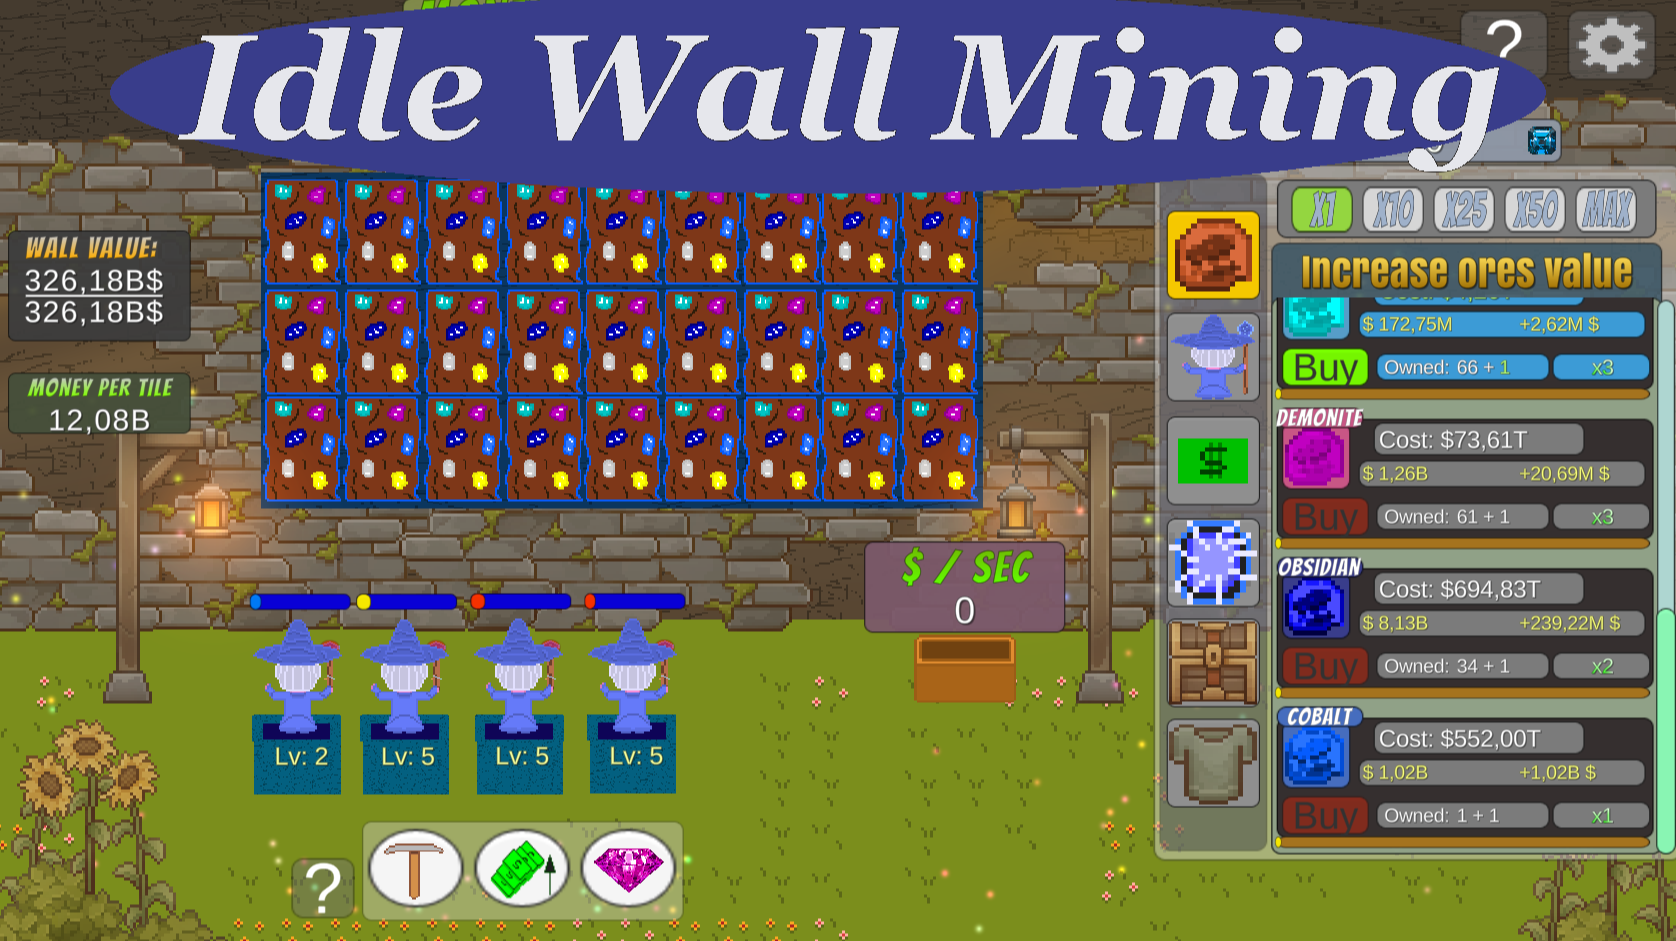 Idle Wall Mining Game Image